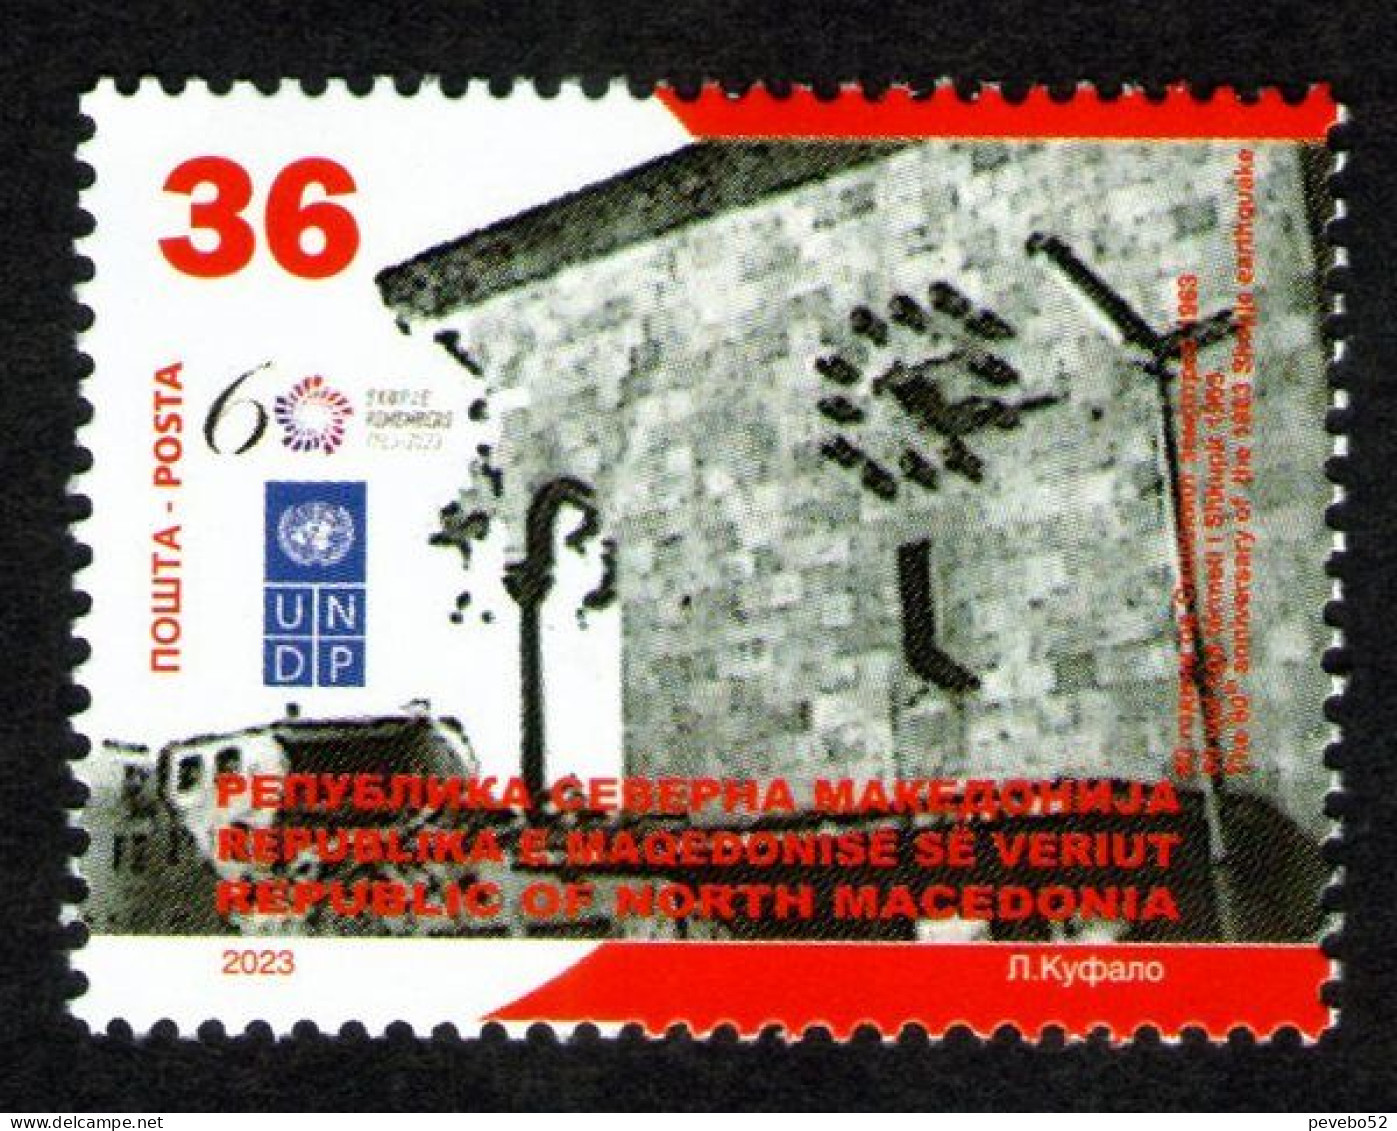 NORTH MACEDONIA 2023 - The 60th ANNIVERSARY OF THE SKOPJE EARTHQUAKE MNH - Nordmazedonien